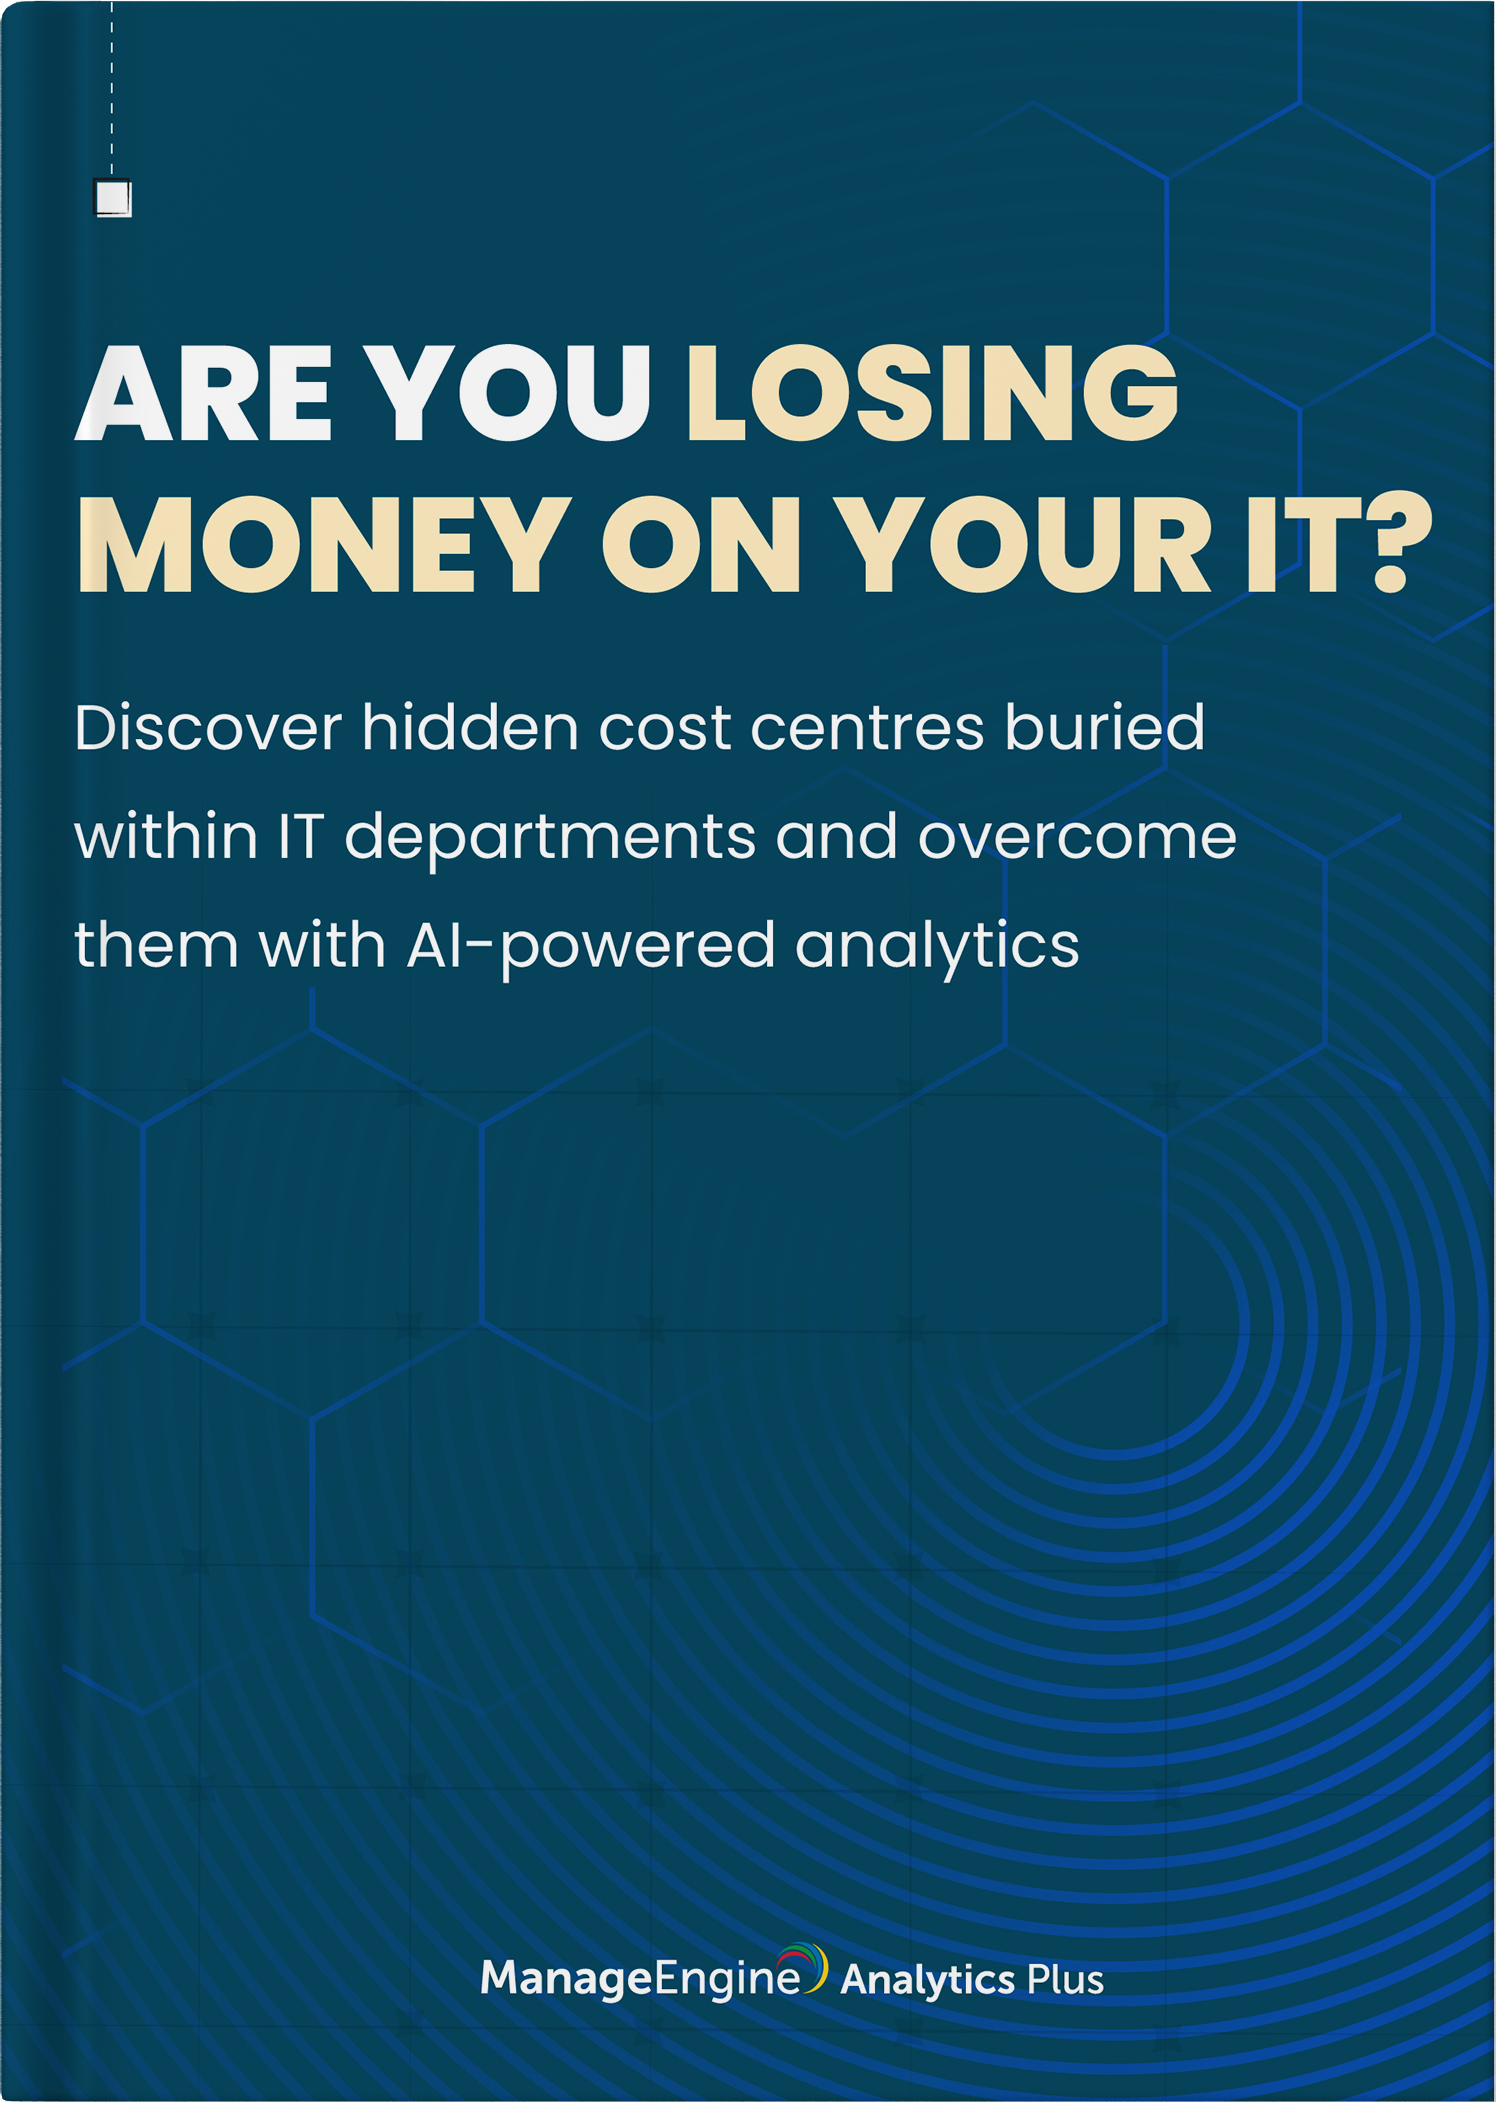 Are you losing money on your IT?